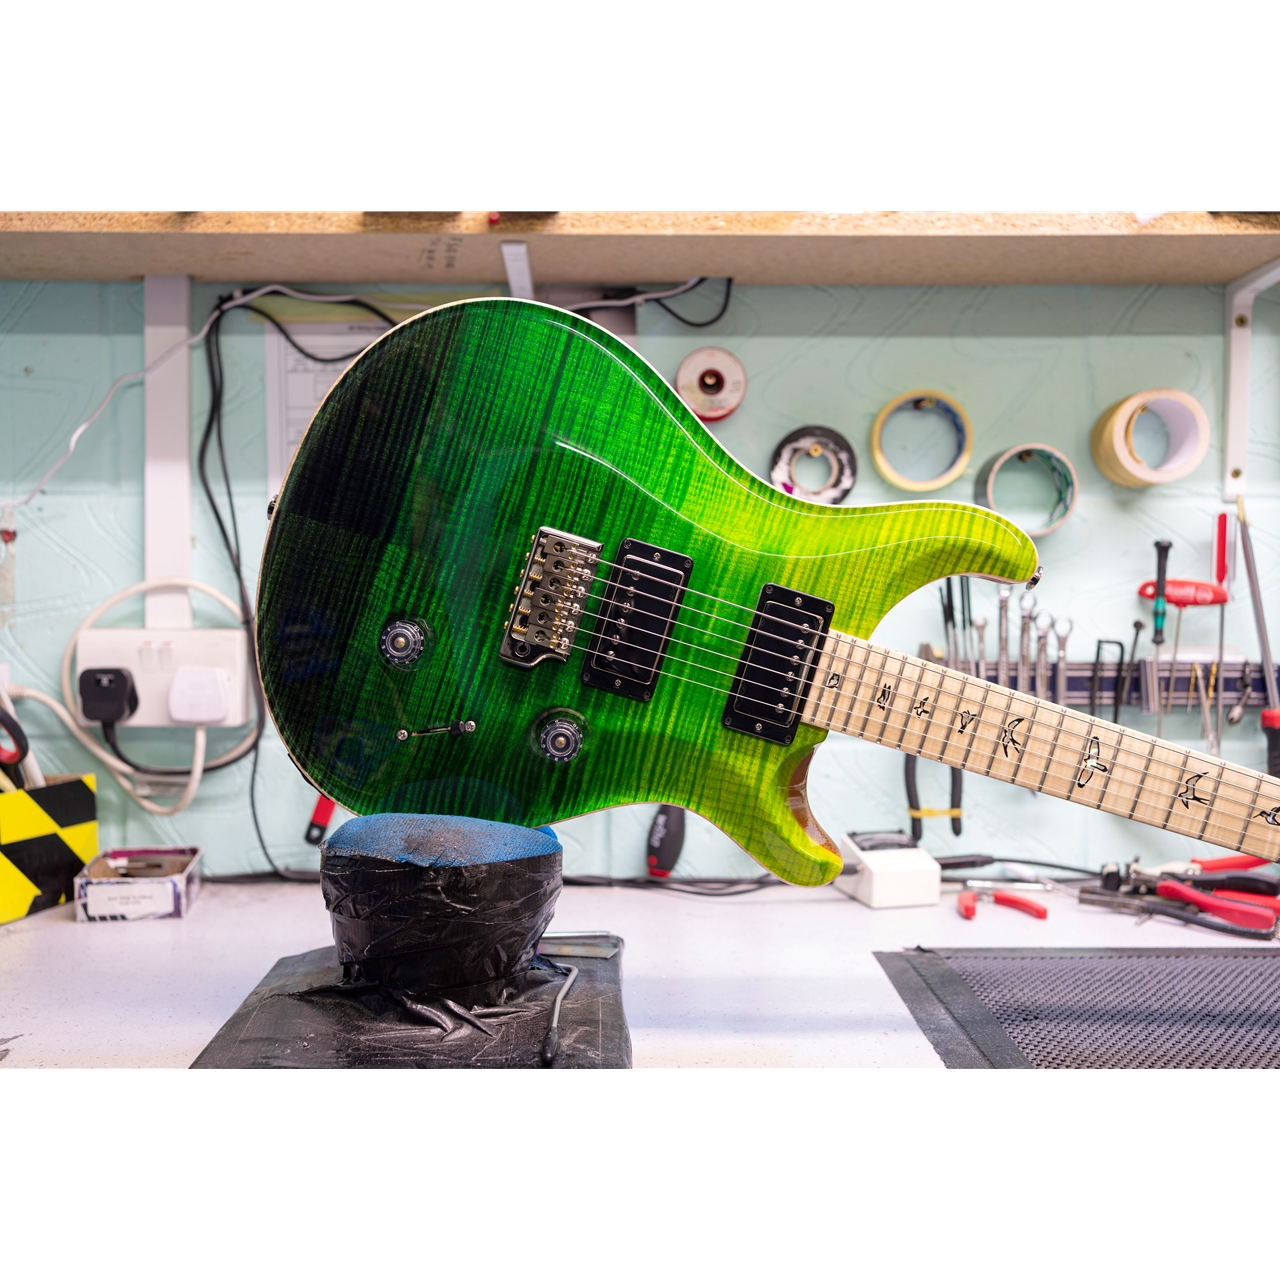 PRS Custom 24, Wood Library, 10 Top, Figured Maple Neck & Fretboard - Green Fade, 2021, (One of a Kind)